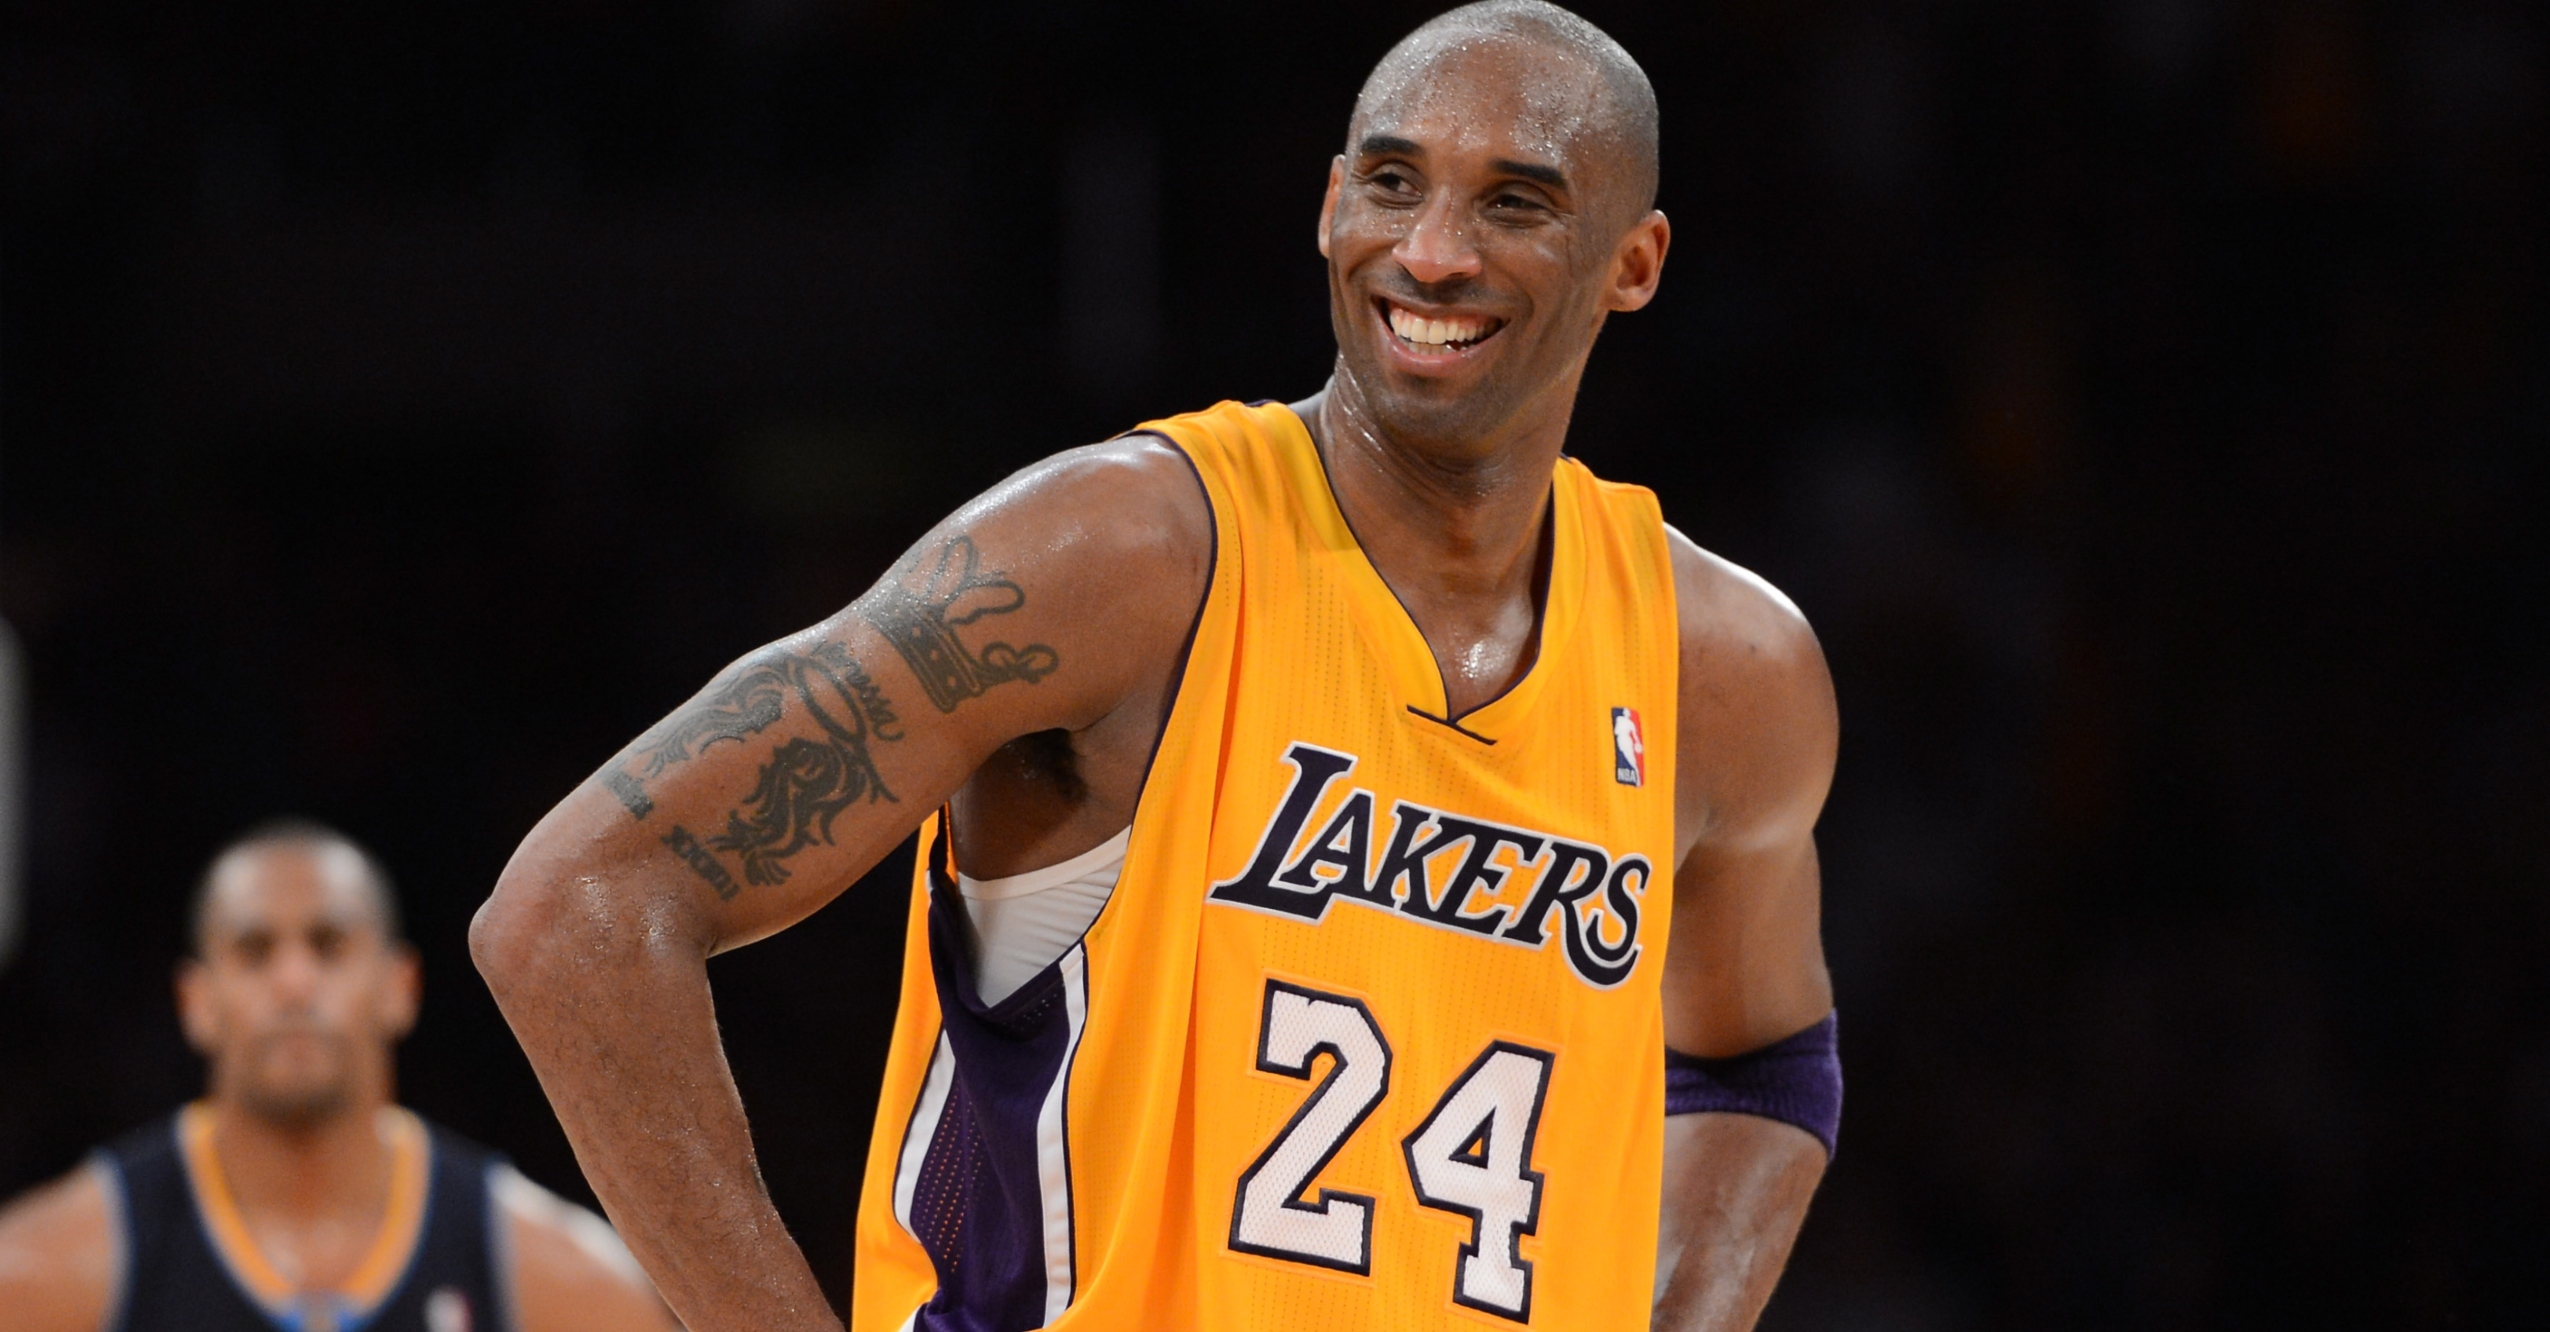 Kobe Bryant's Lakers Jersey Could Fetch a Record $7 Million at